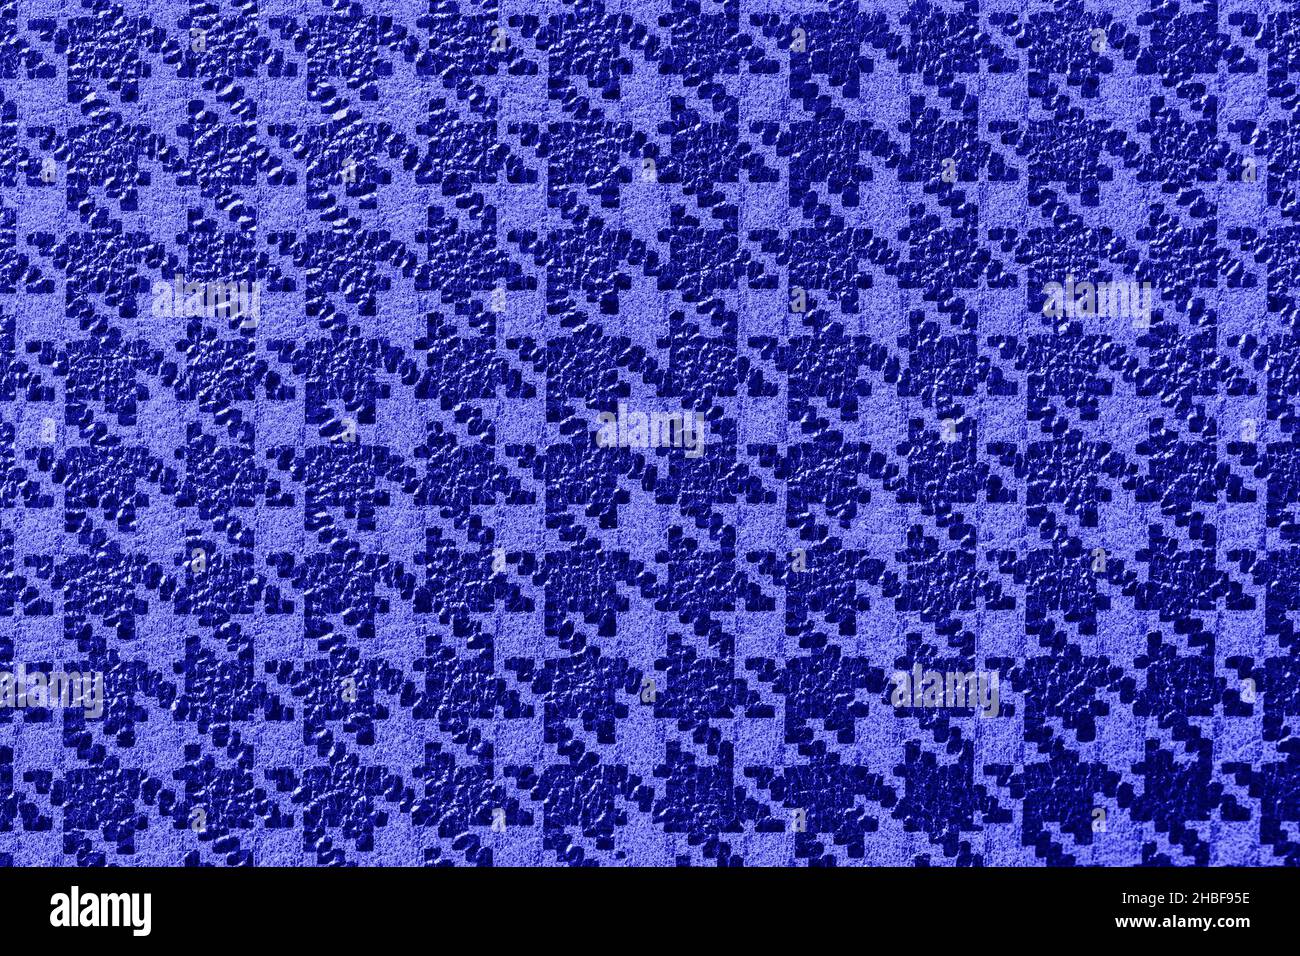 Houndstooth Fabric High Resolution Stock Photography and Images - Alamy